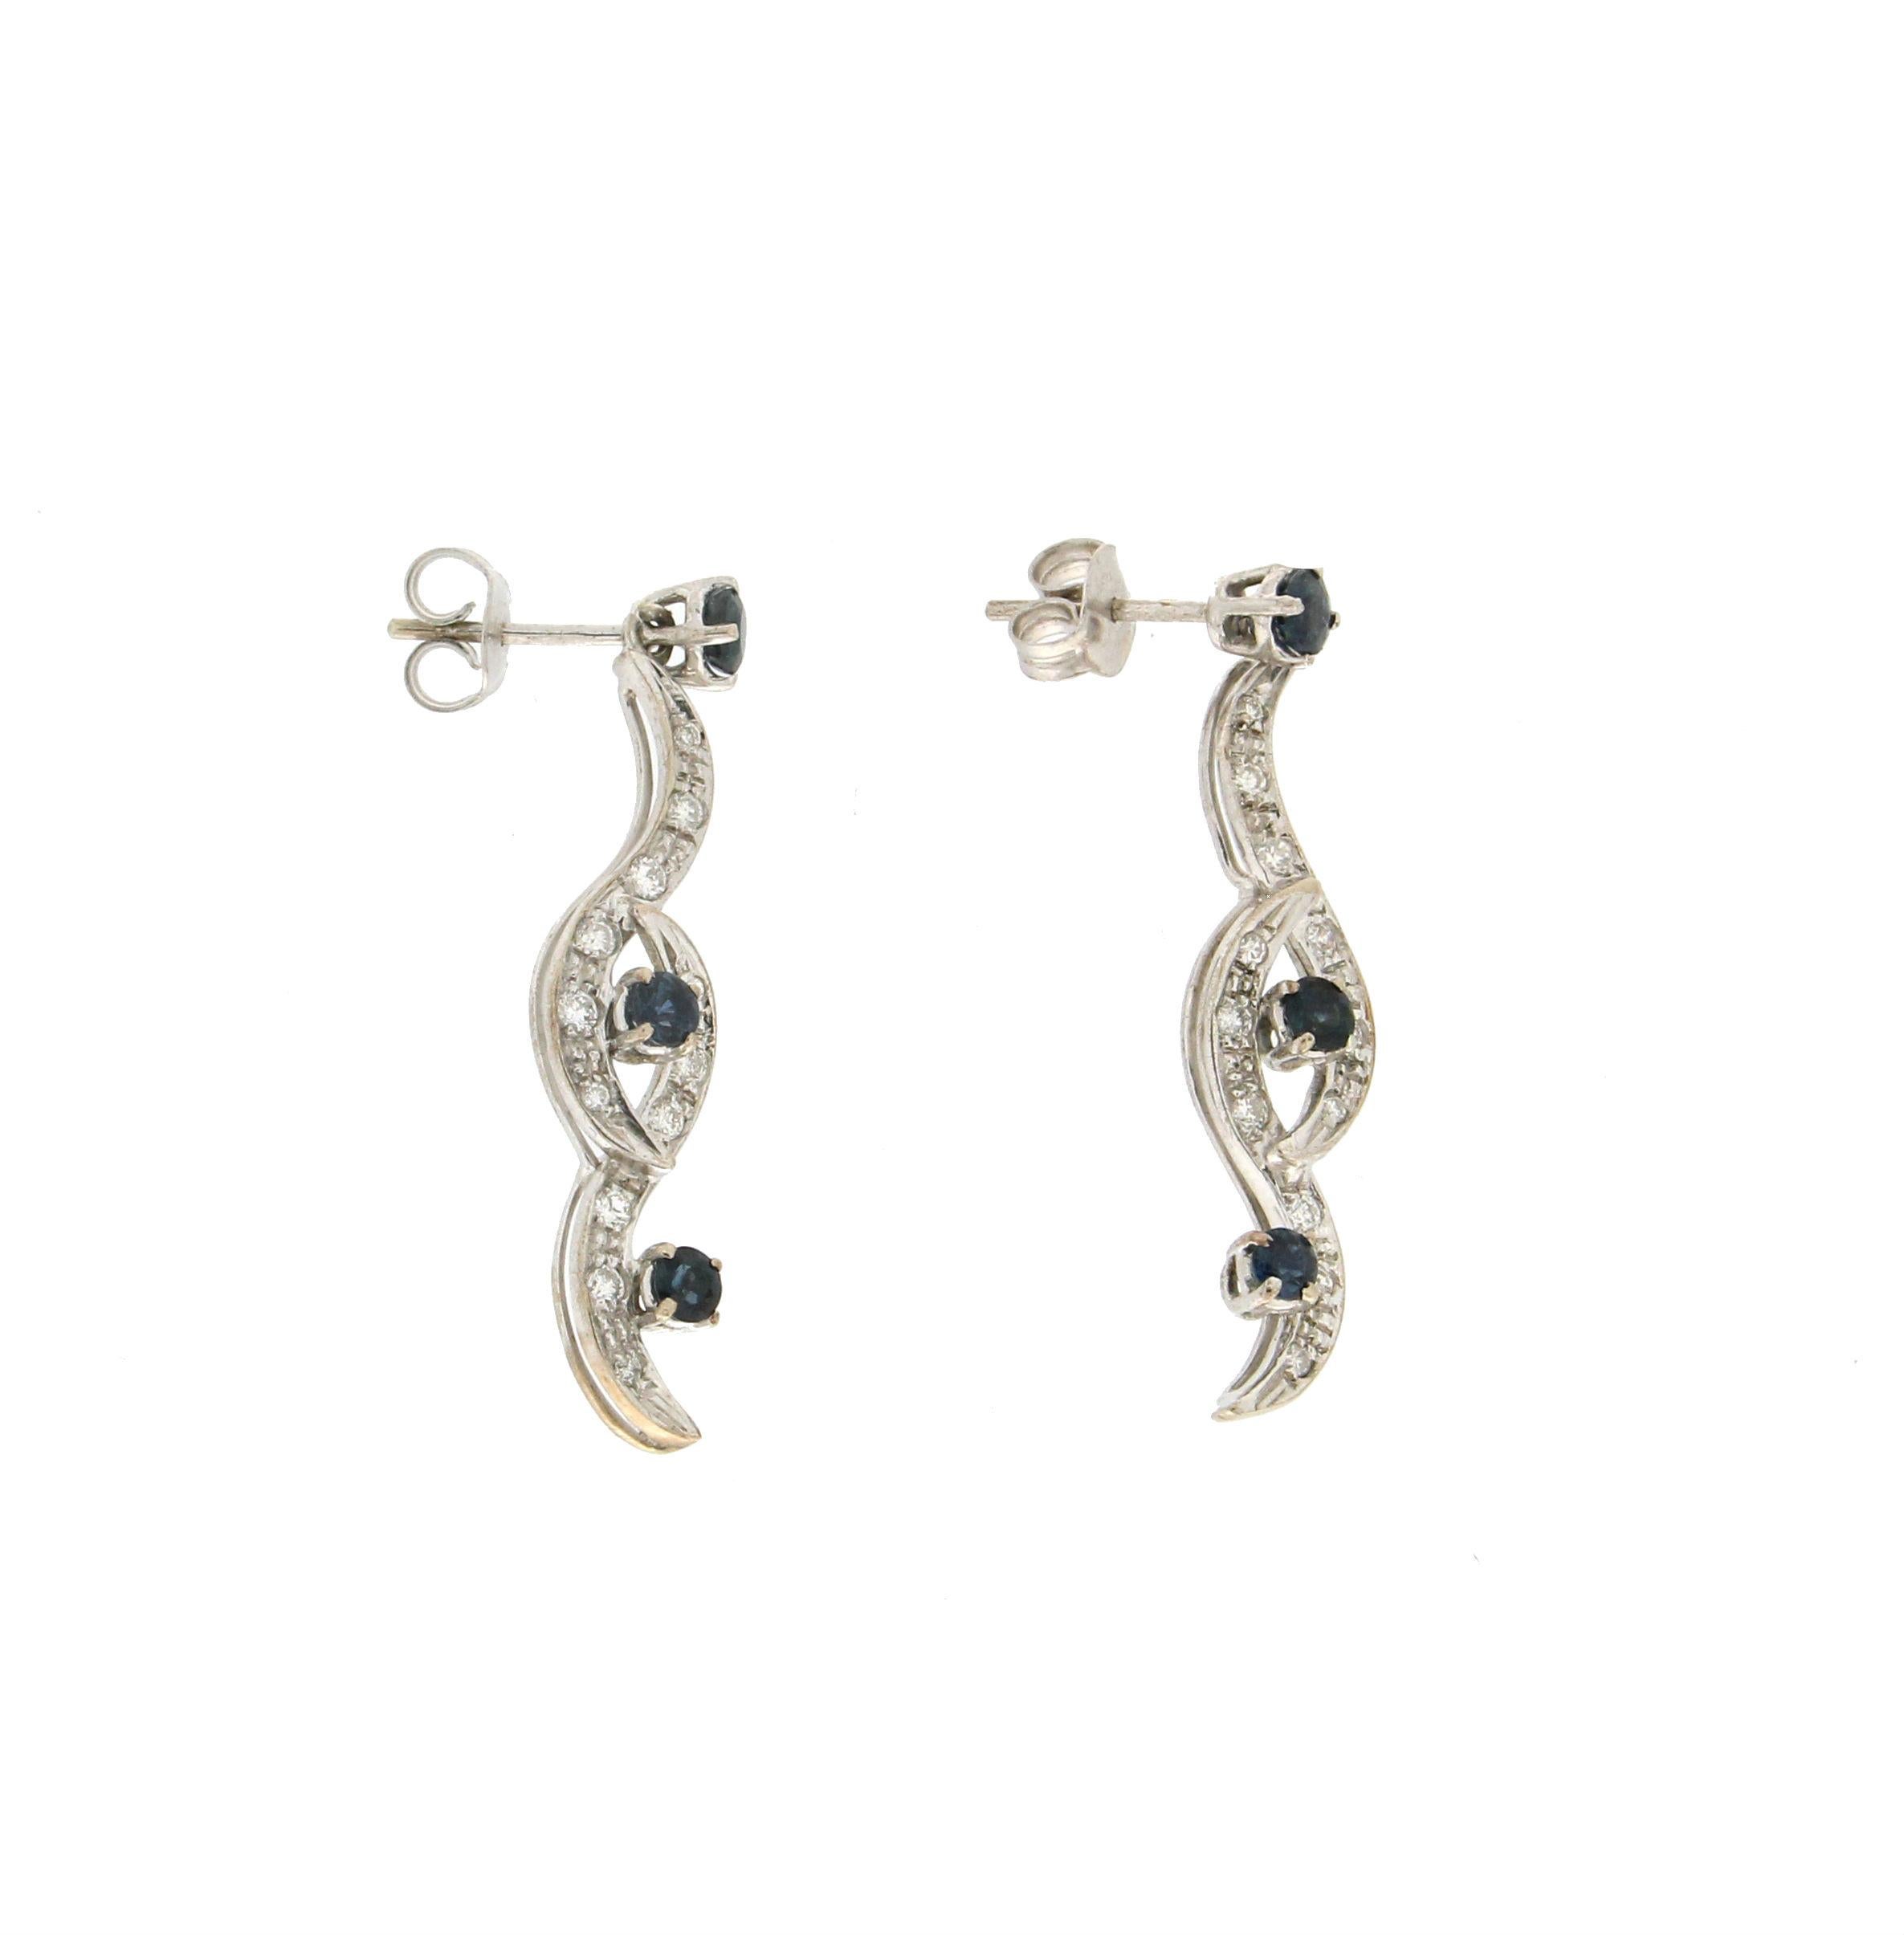 18 karat white gold drop earrings. Handmade by our artisans and assembled with sapphires and diamonds.

Sapphires weight 1.14 karat
Diamonds weight 0.40 karat
Earrings total weight 5.60 grams